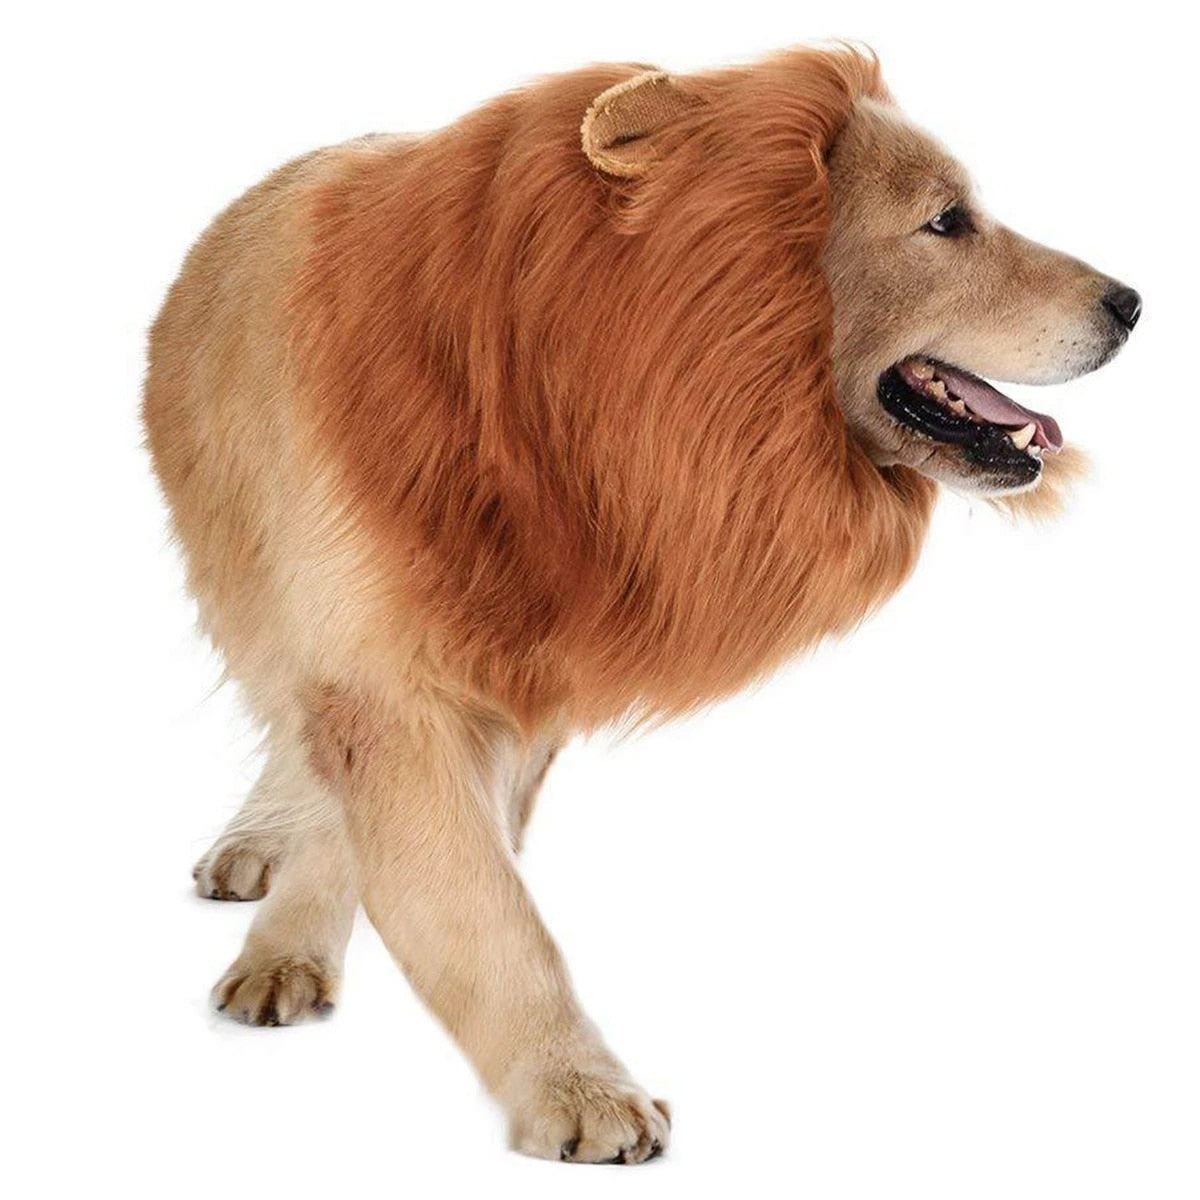 Pet Dog Lion Mane Wig – The Purr-fect Costume for Your Furry Royalty!